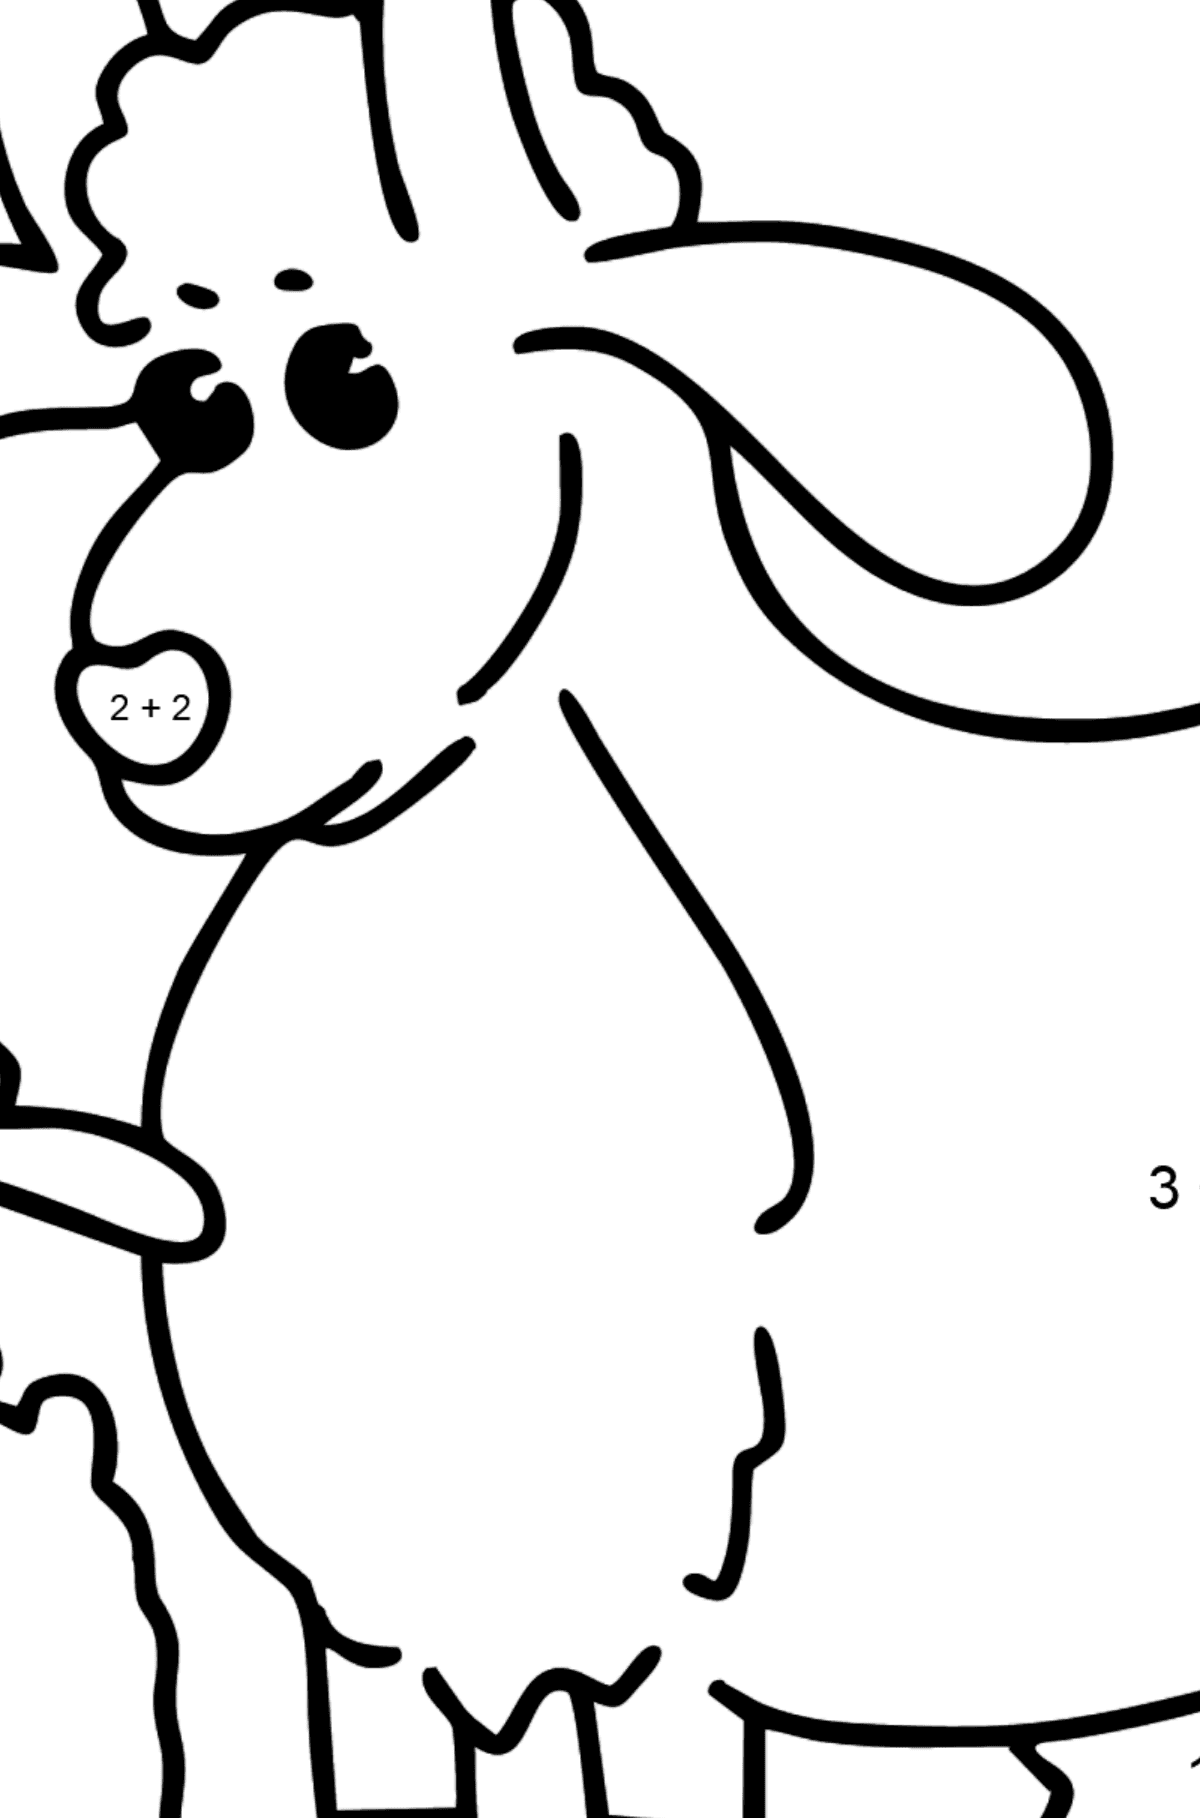 Goat and Kid coloring page - Math Coloring - Addition for Kids